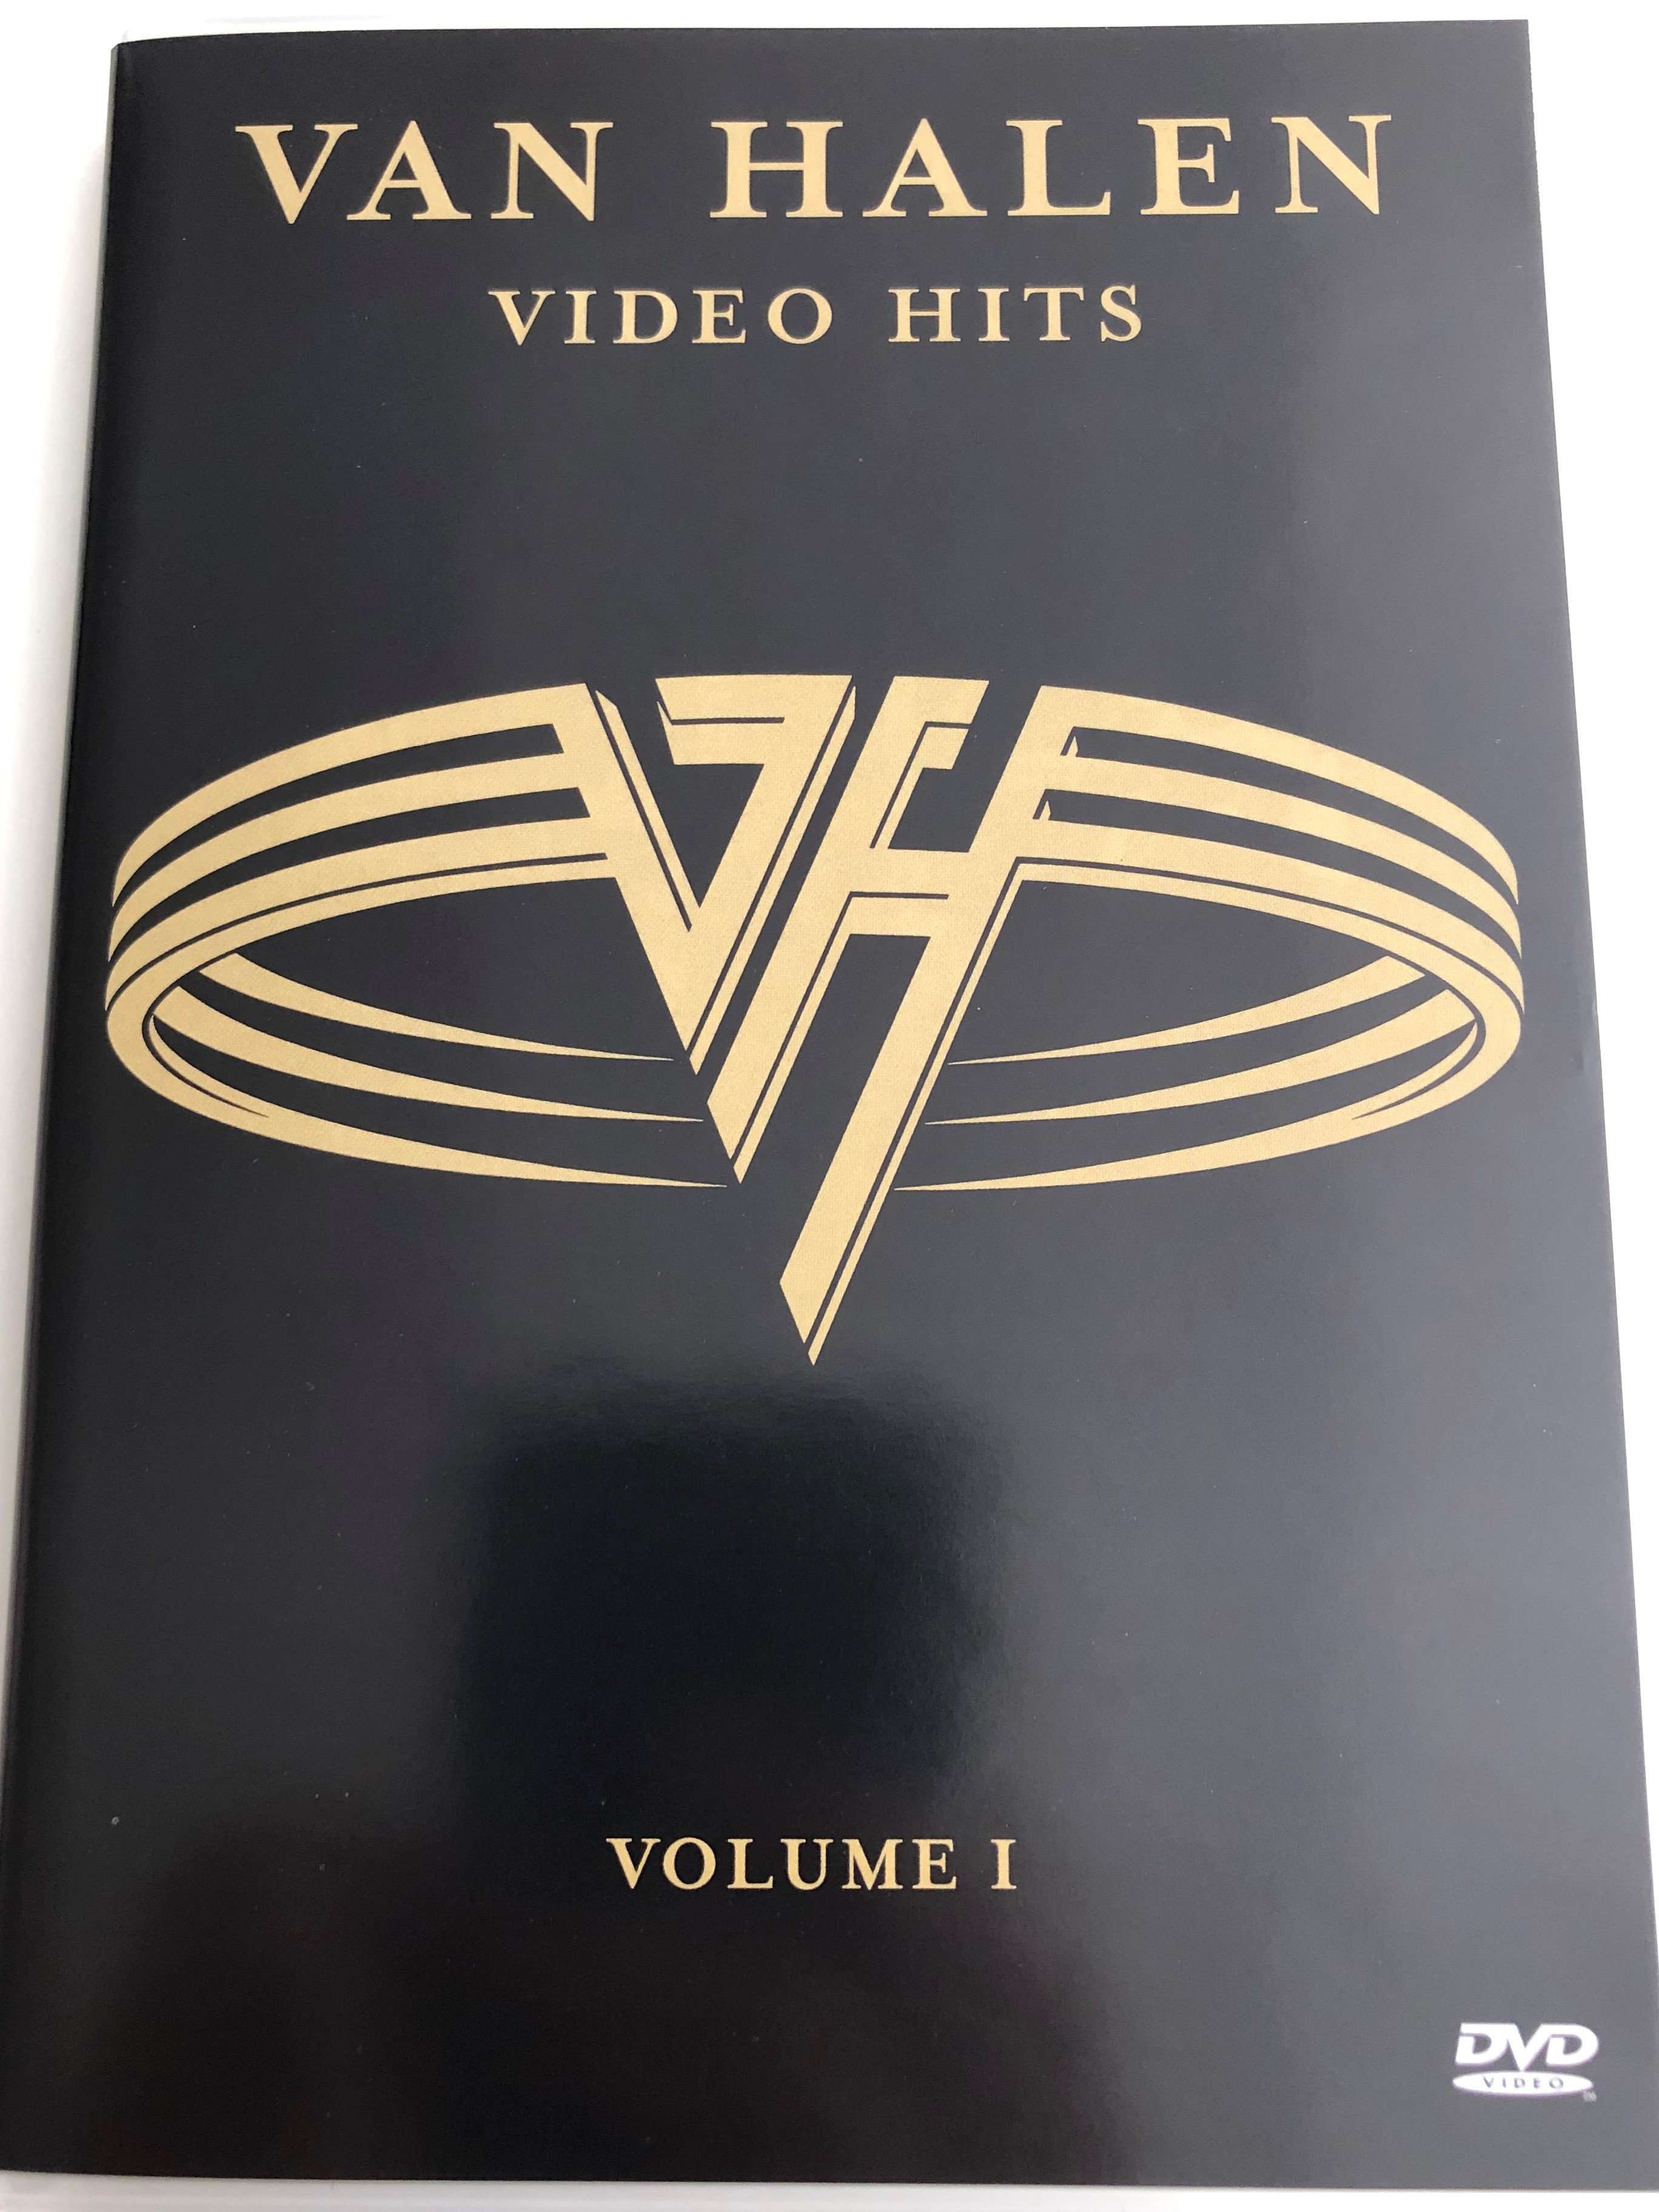 van-halen-video-hits-volume-1-dvd-1999-jump-panama-finish-what-ya-started-dreams-can-t-stop-lovin-you-without-you-1-.jpg